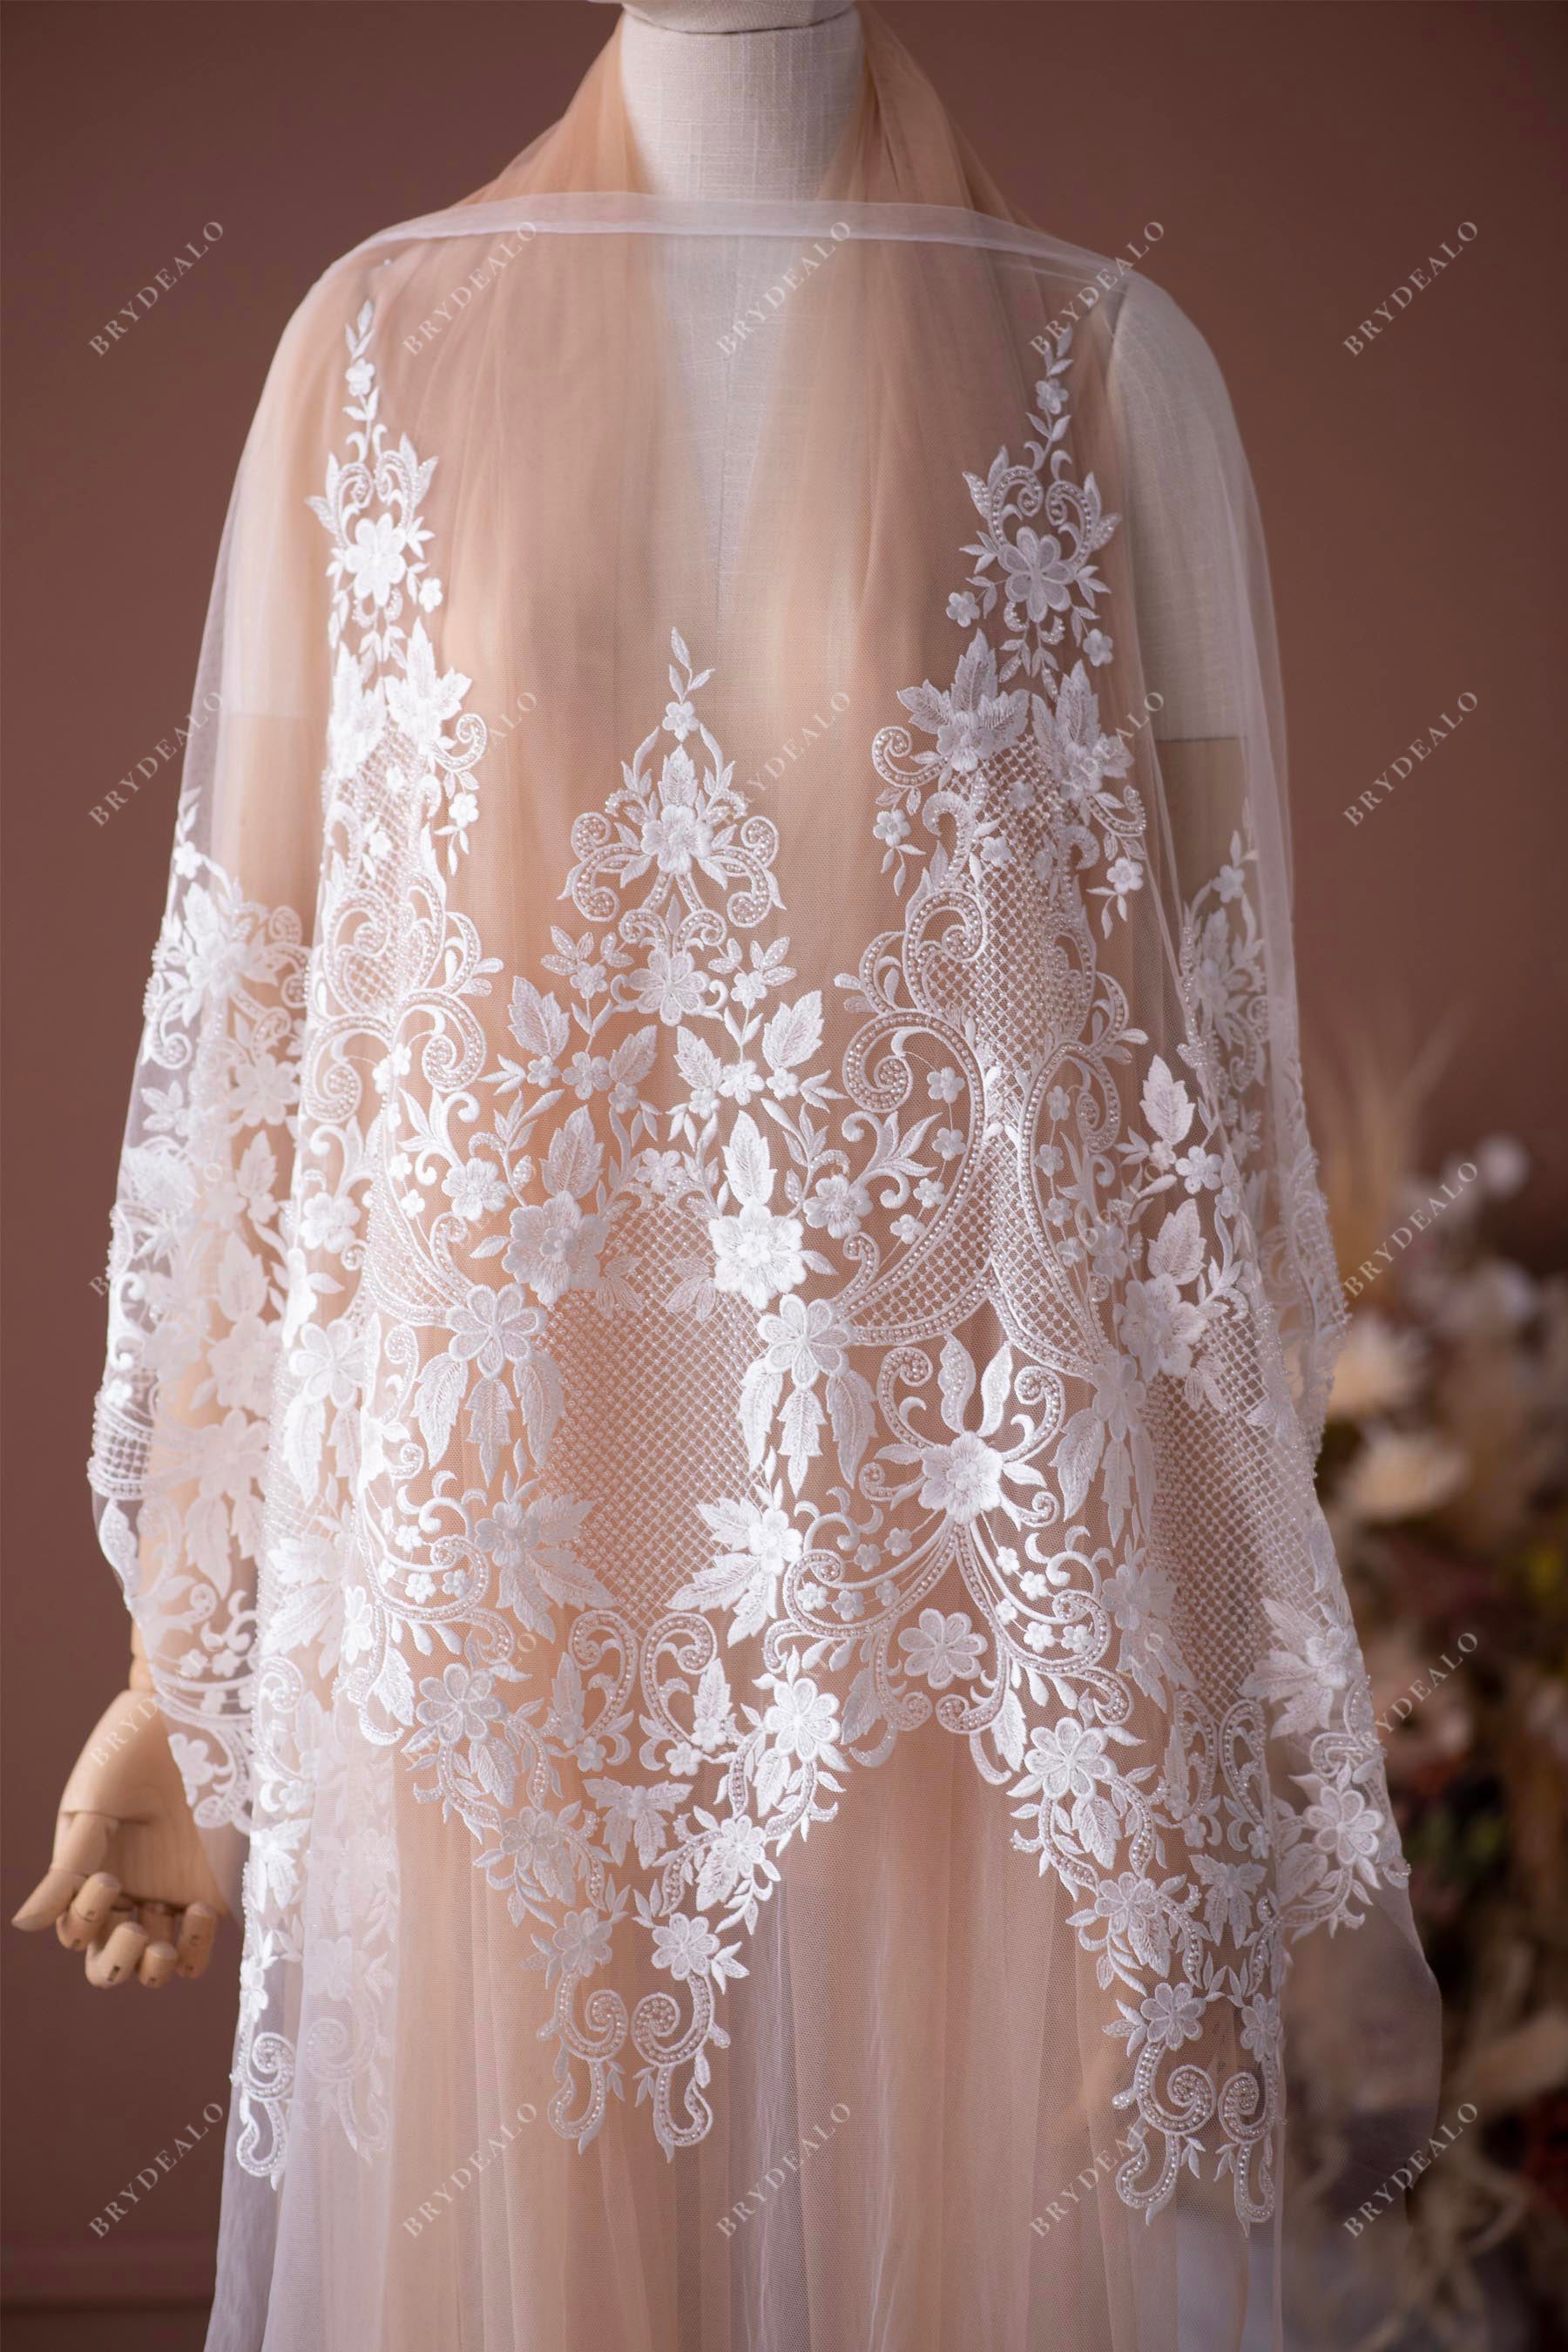 exquisite beaded bridal lace fabric for wedding dress